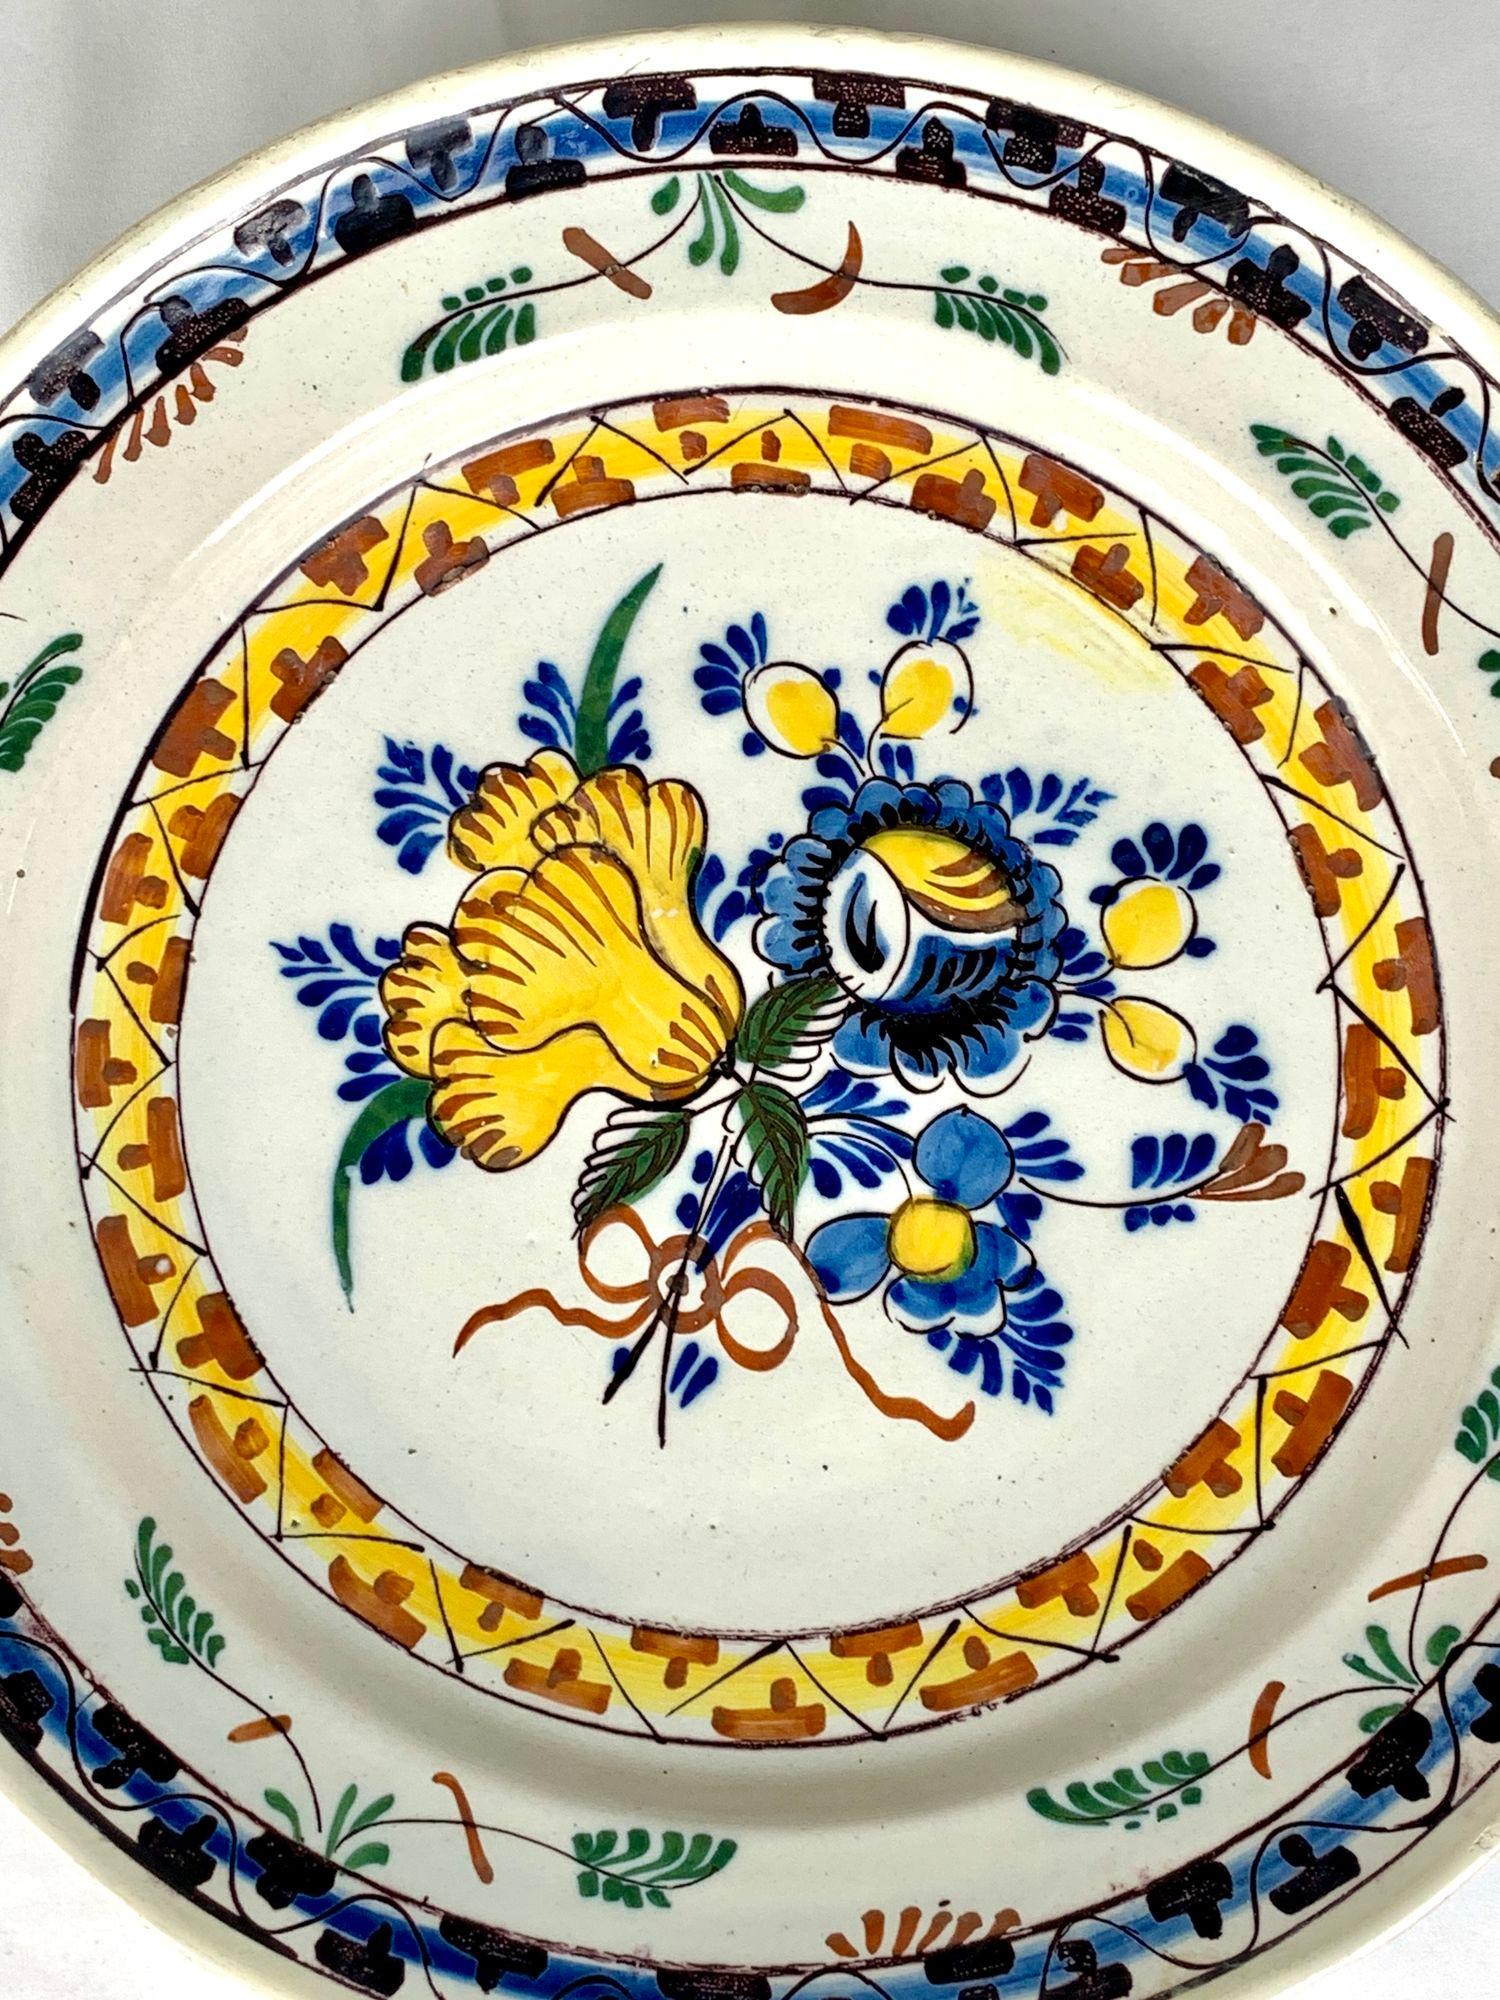 Made in the Netherlands circa 1780, this lovely Delft charger features a hand painted bouquet of beautiful flowers.
We see a large yellow tulip, yellow tulip buds, and bright blue leaves, all tied together with an iron red bow.
Encircling the